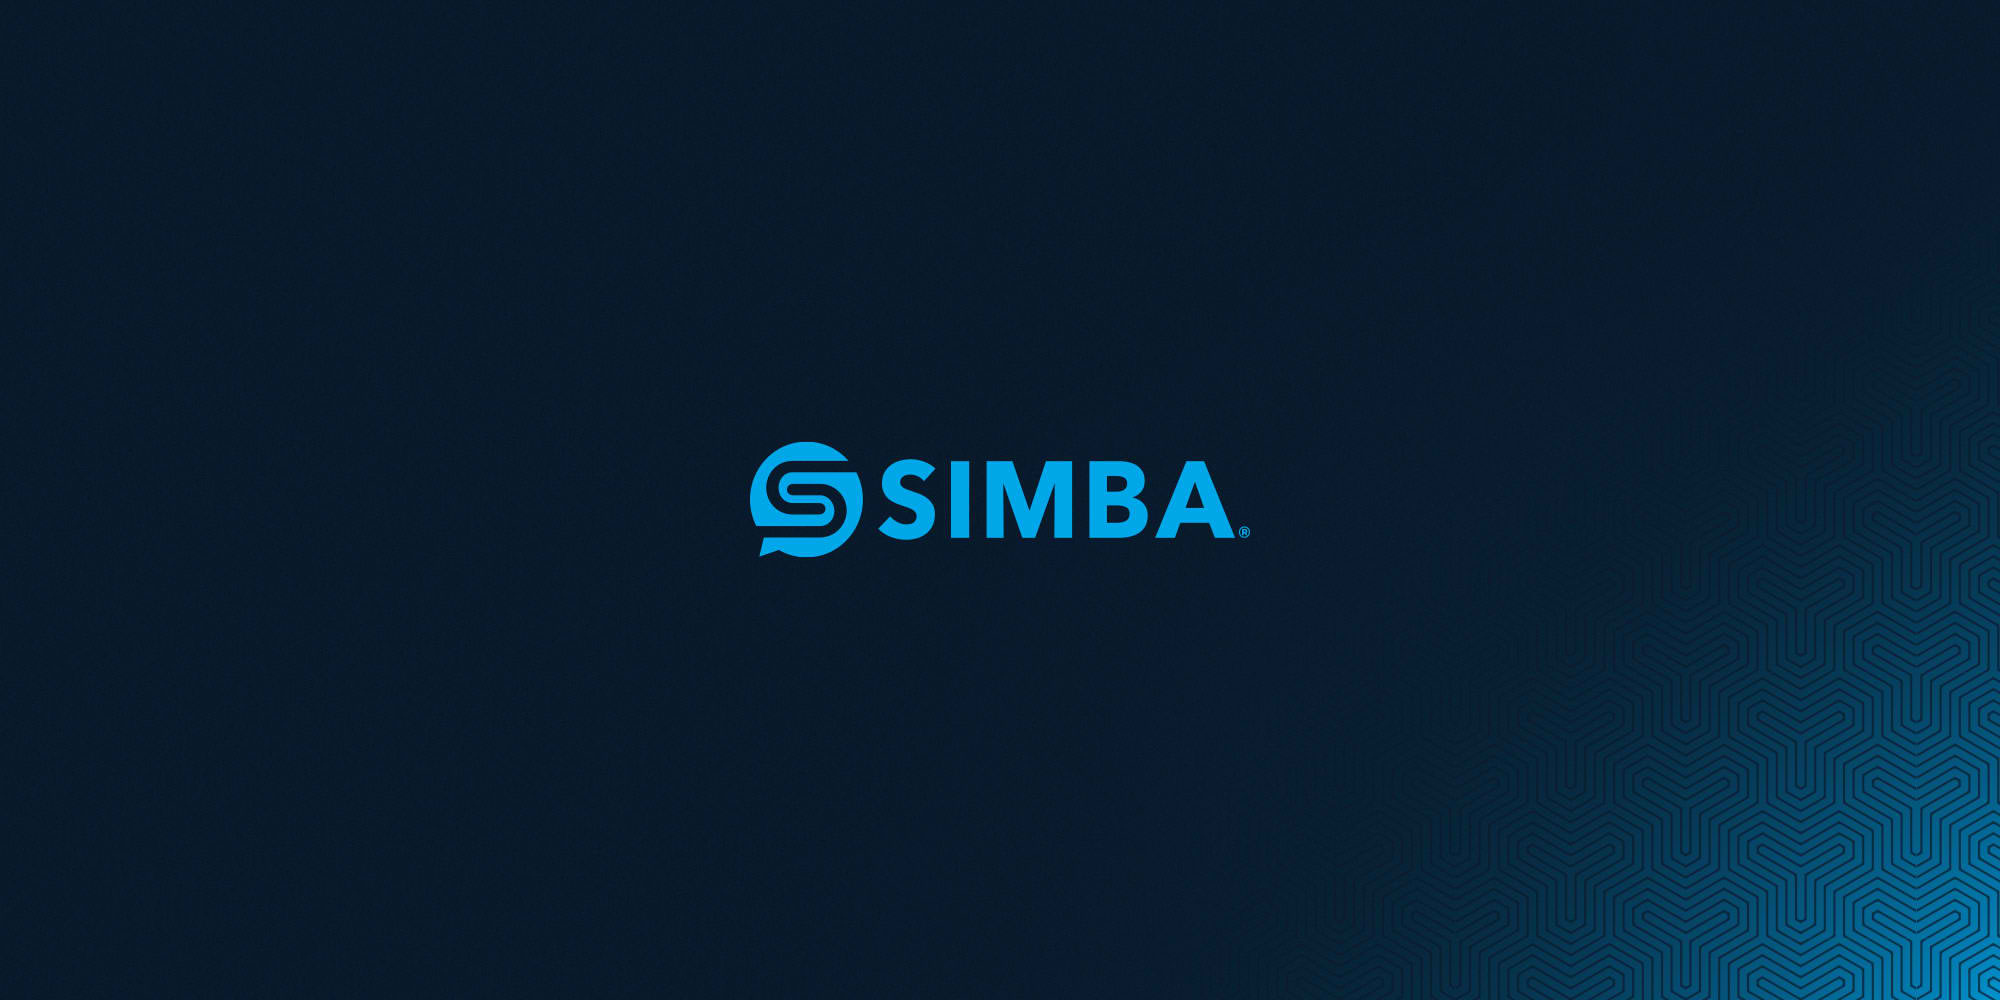 https://nftgames.net/wp-content/uploads/2022/06/SIMBA-Chain-feature.jpg